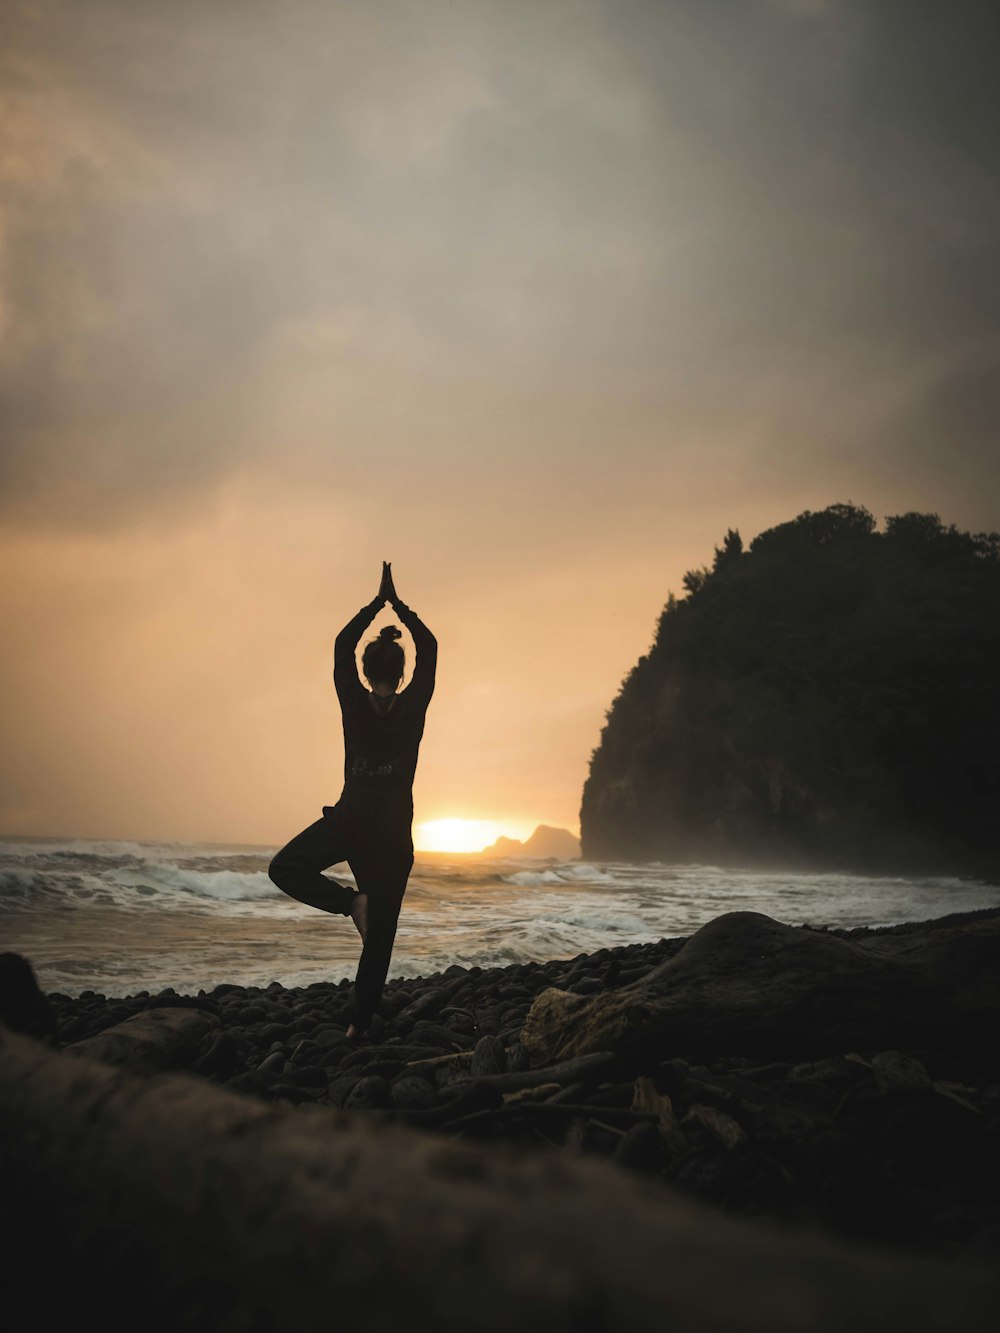 woman doing one-foot yoga stance at the beach under grey sky